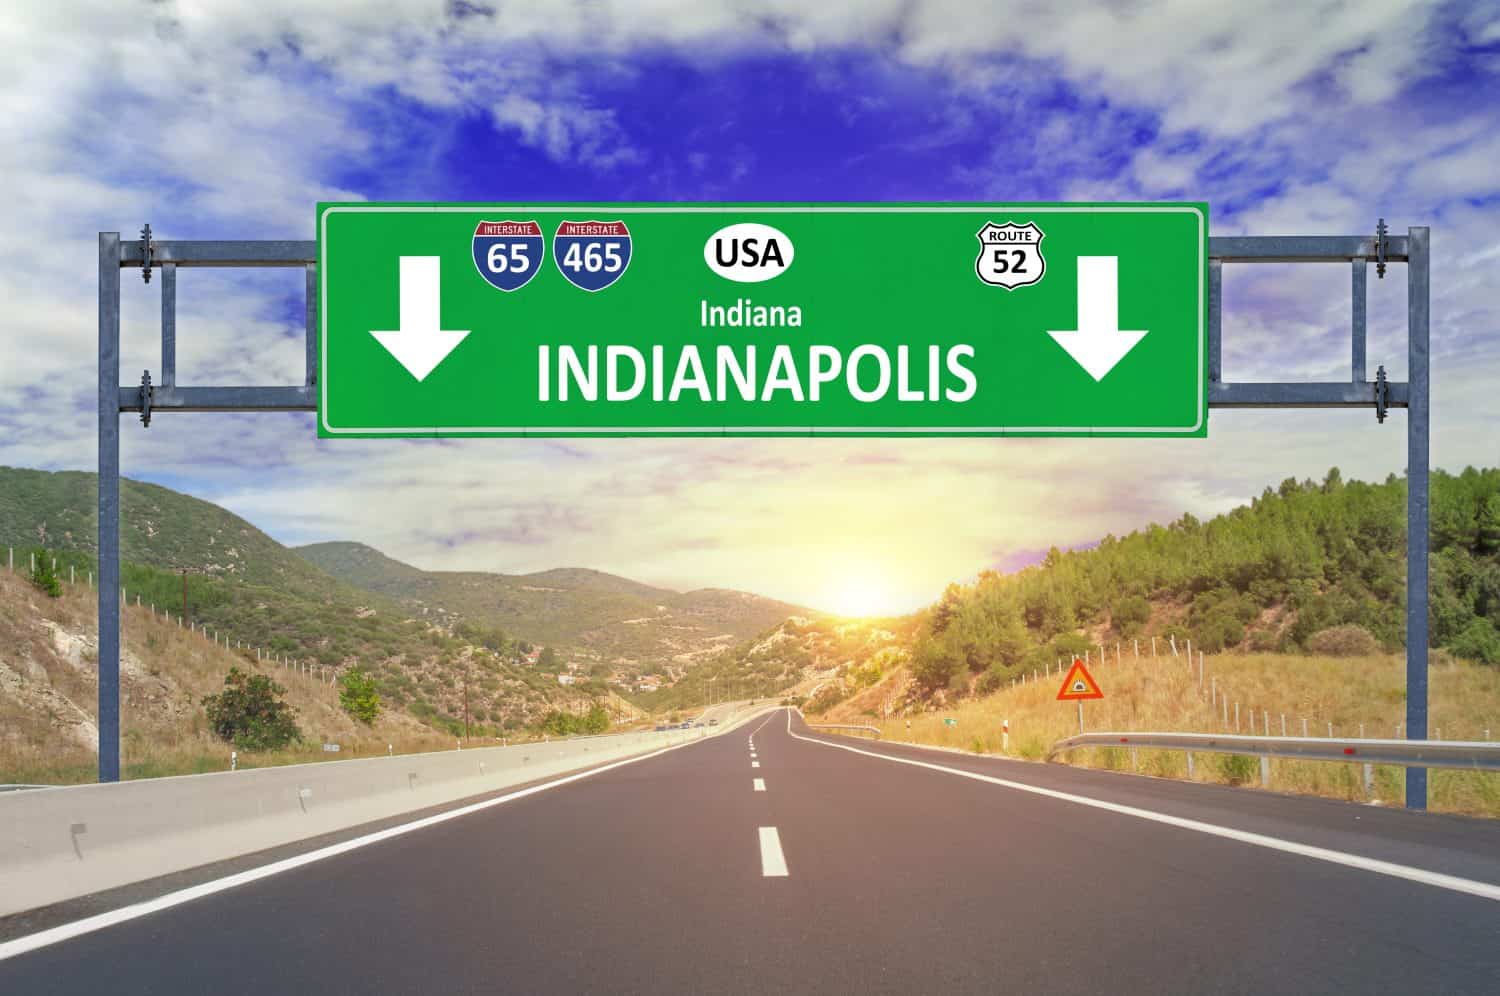 US city Indianapolis road sign on highway